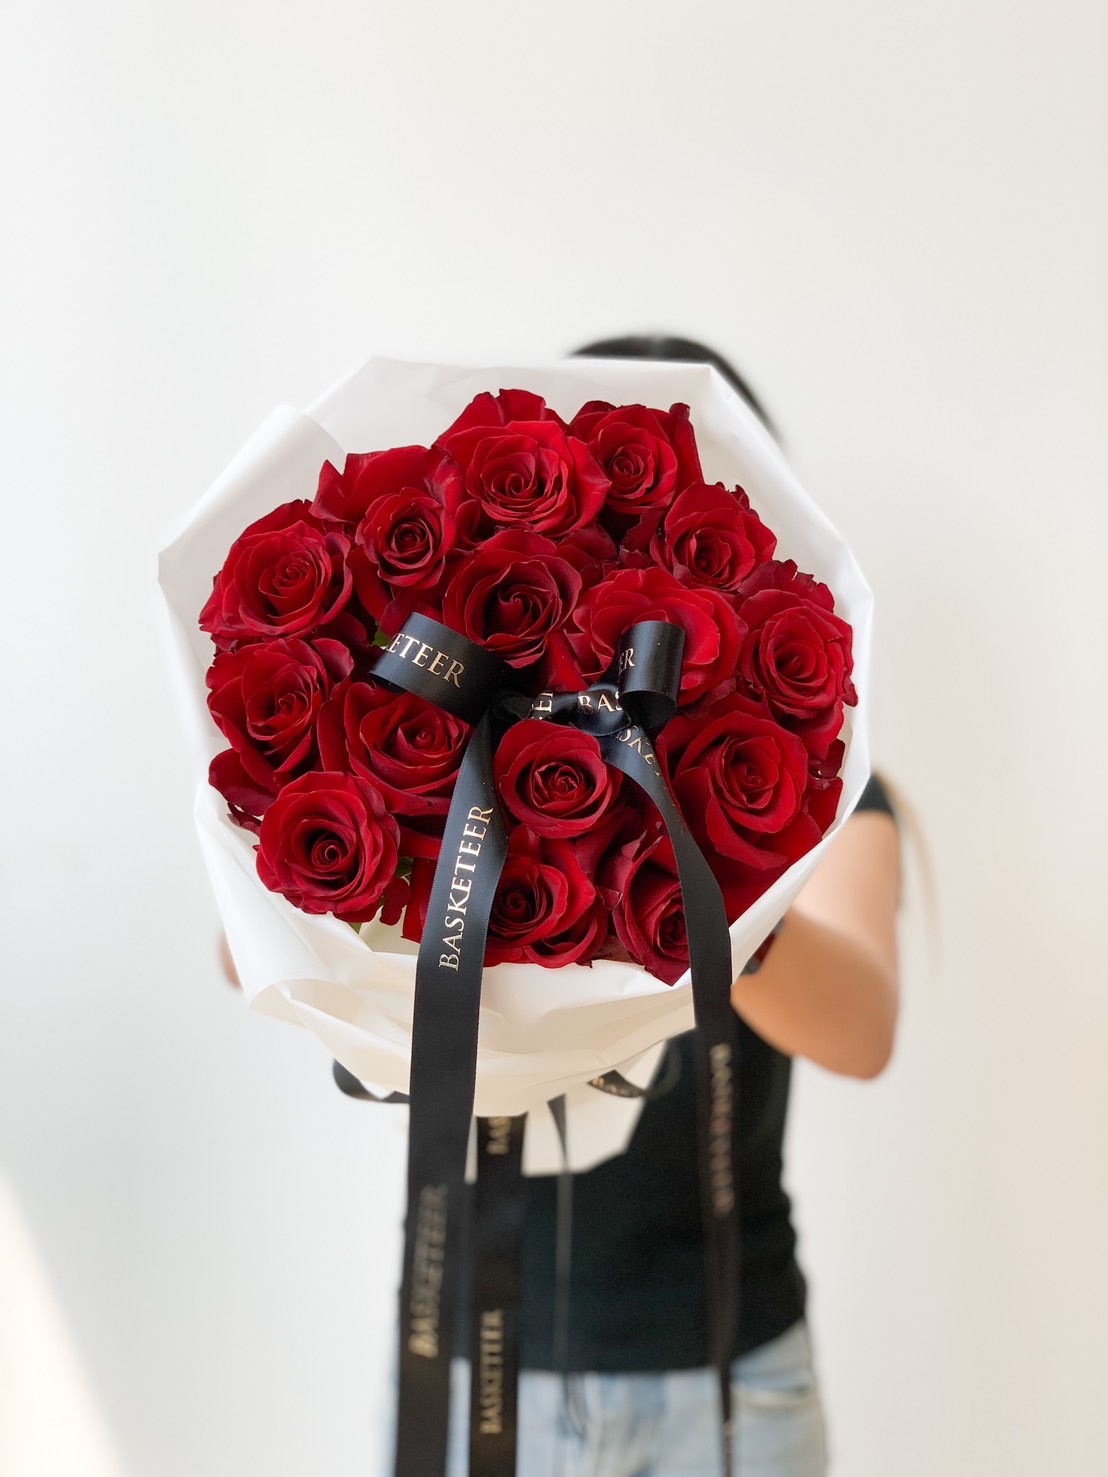 Valentine's Red Explorer Roses Bouquet With a Black Bow.